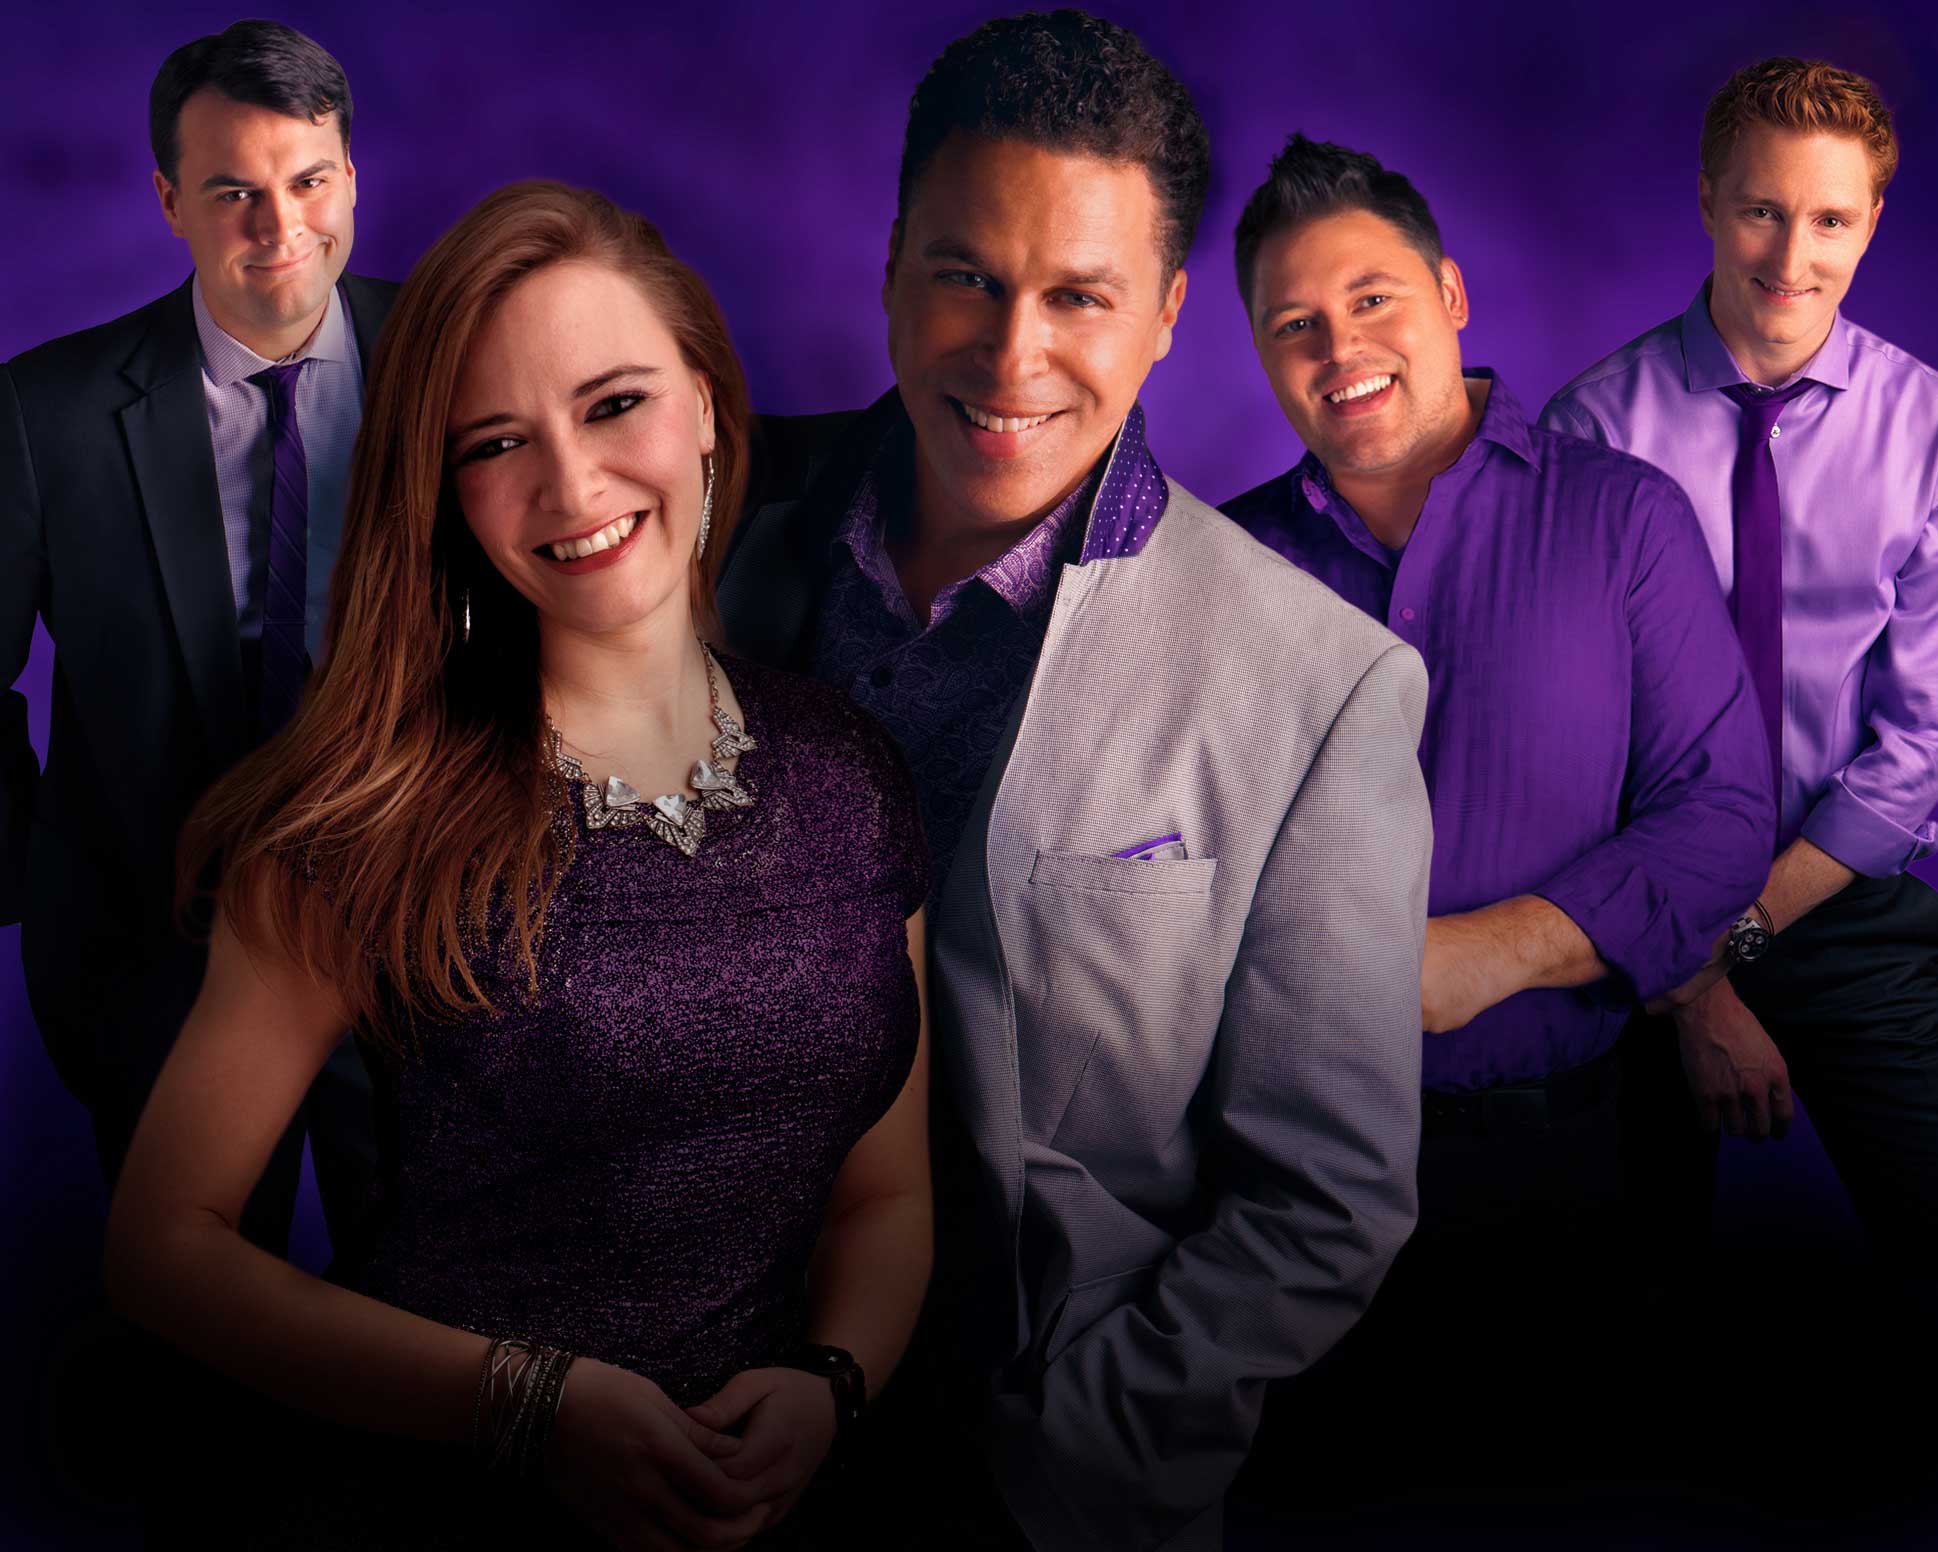 All members of Enough Said are dressed in shades of purple, standing in front of a purple background.